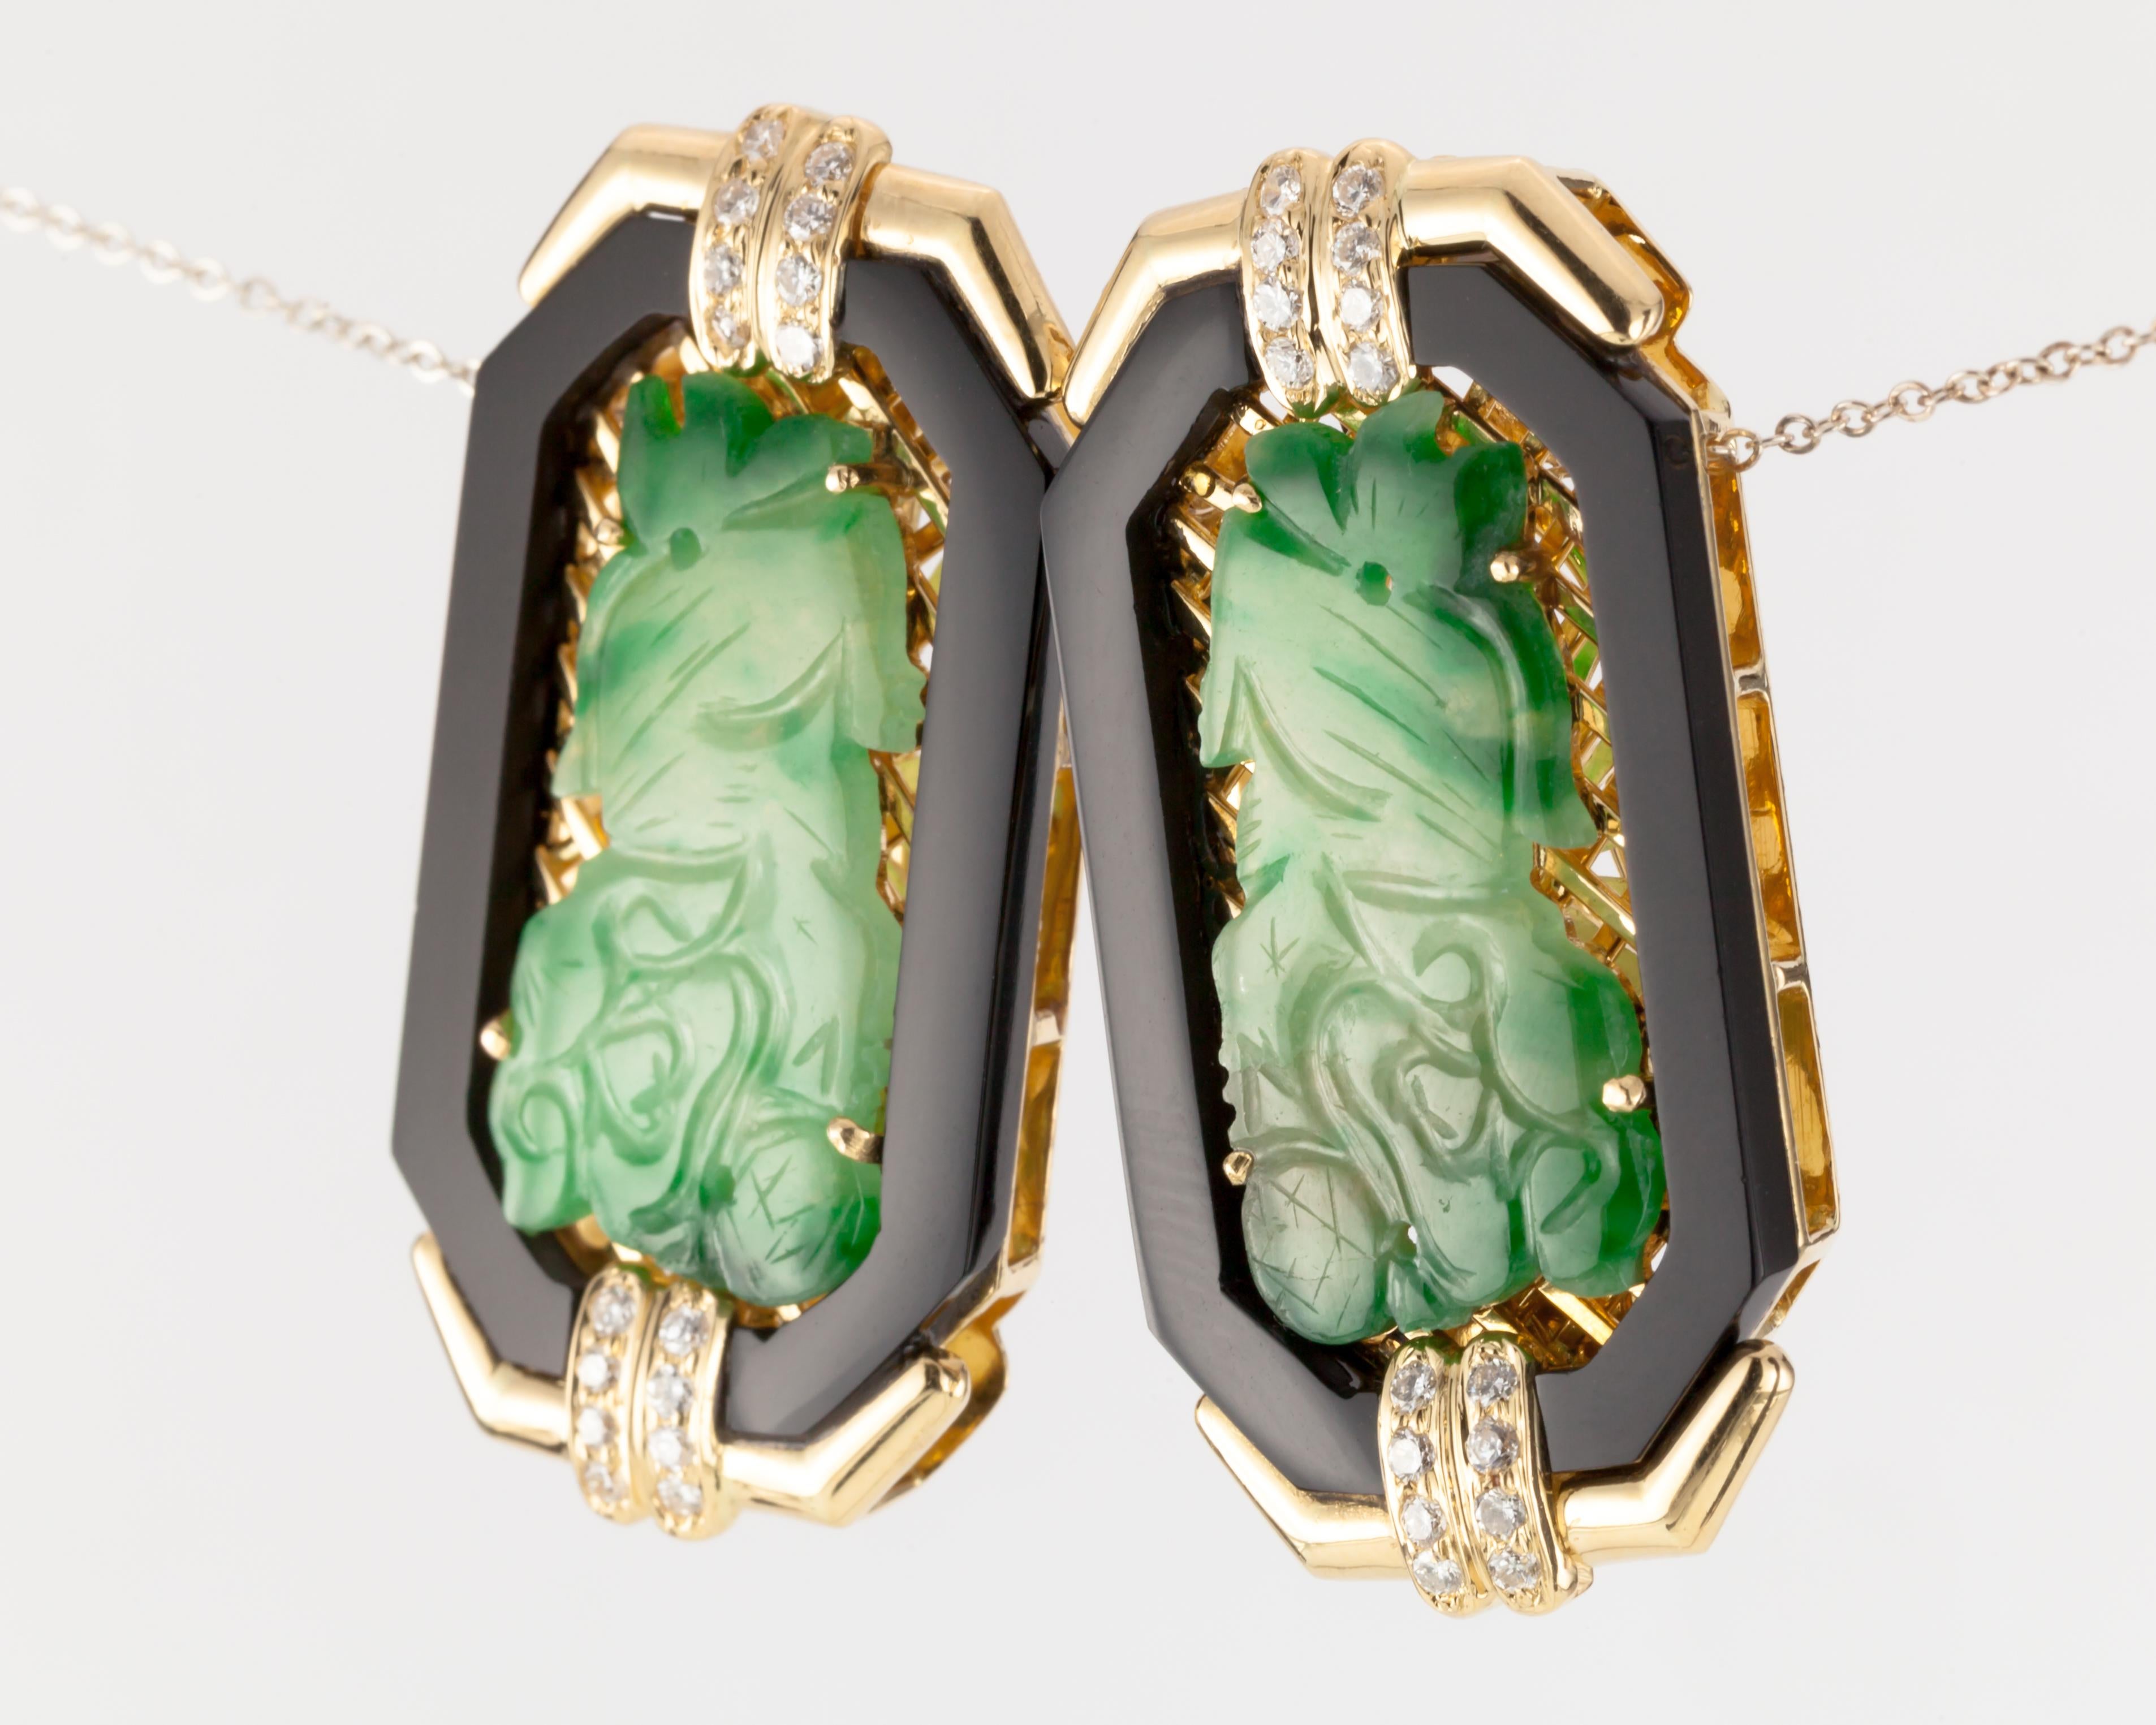 Imperial Jade with Onyx Border and Diamond Accents 18 Karat Yellow Gold Earrings For Sale 10